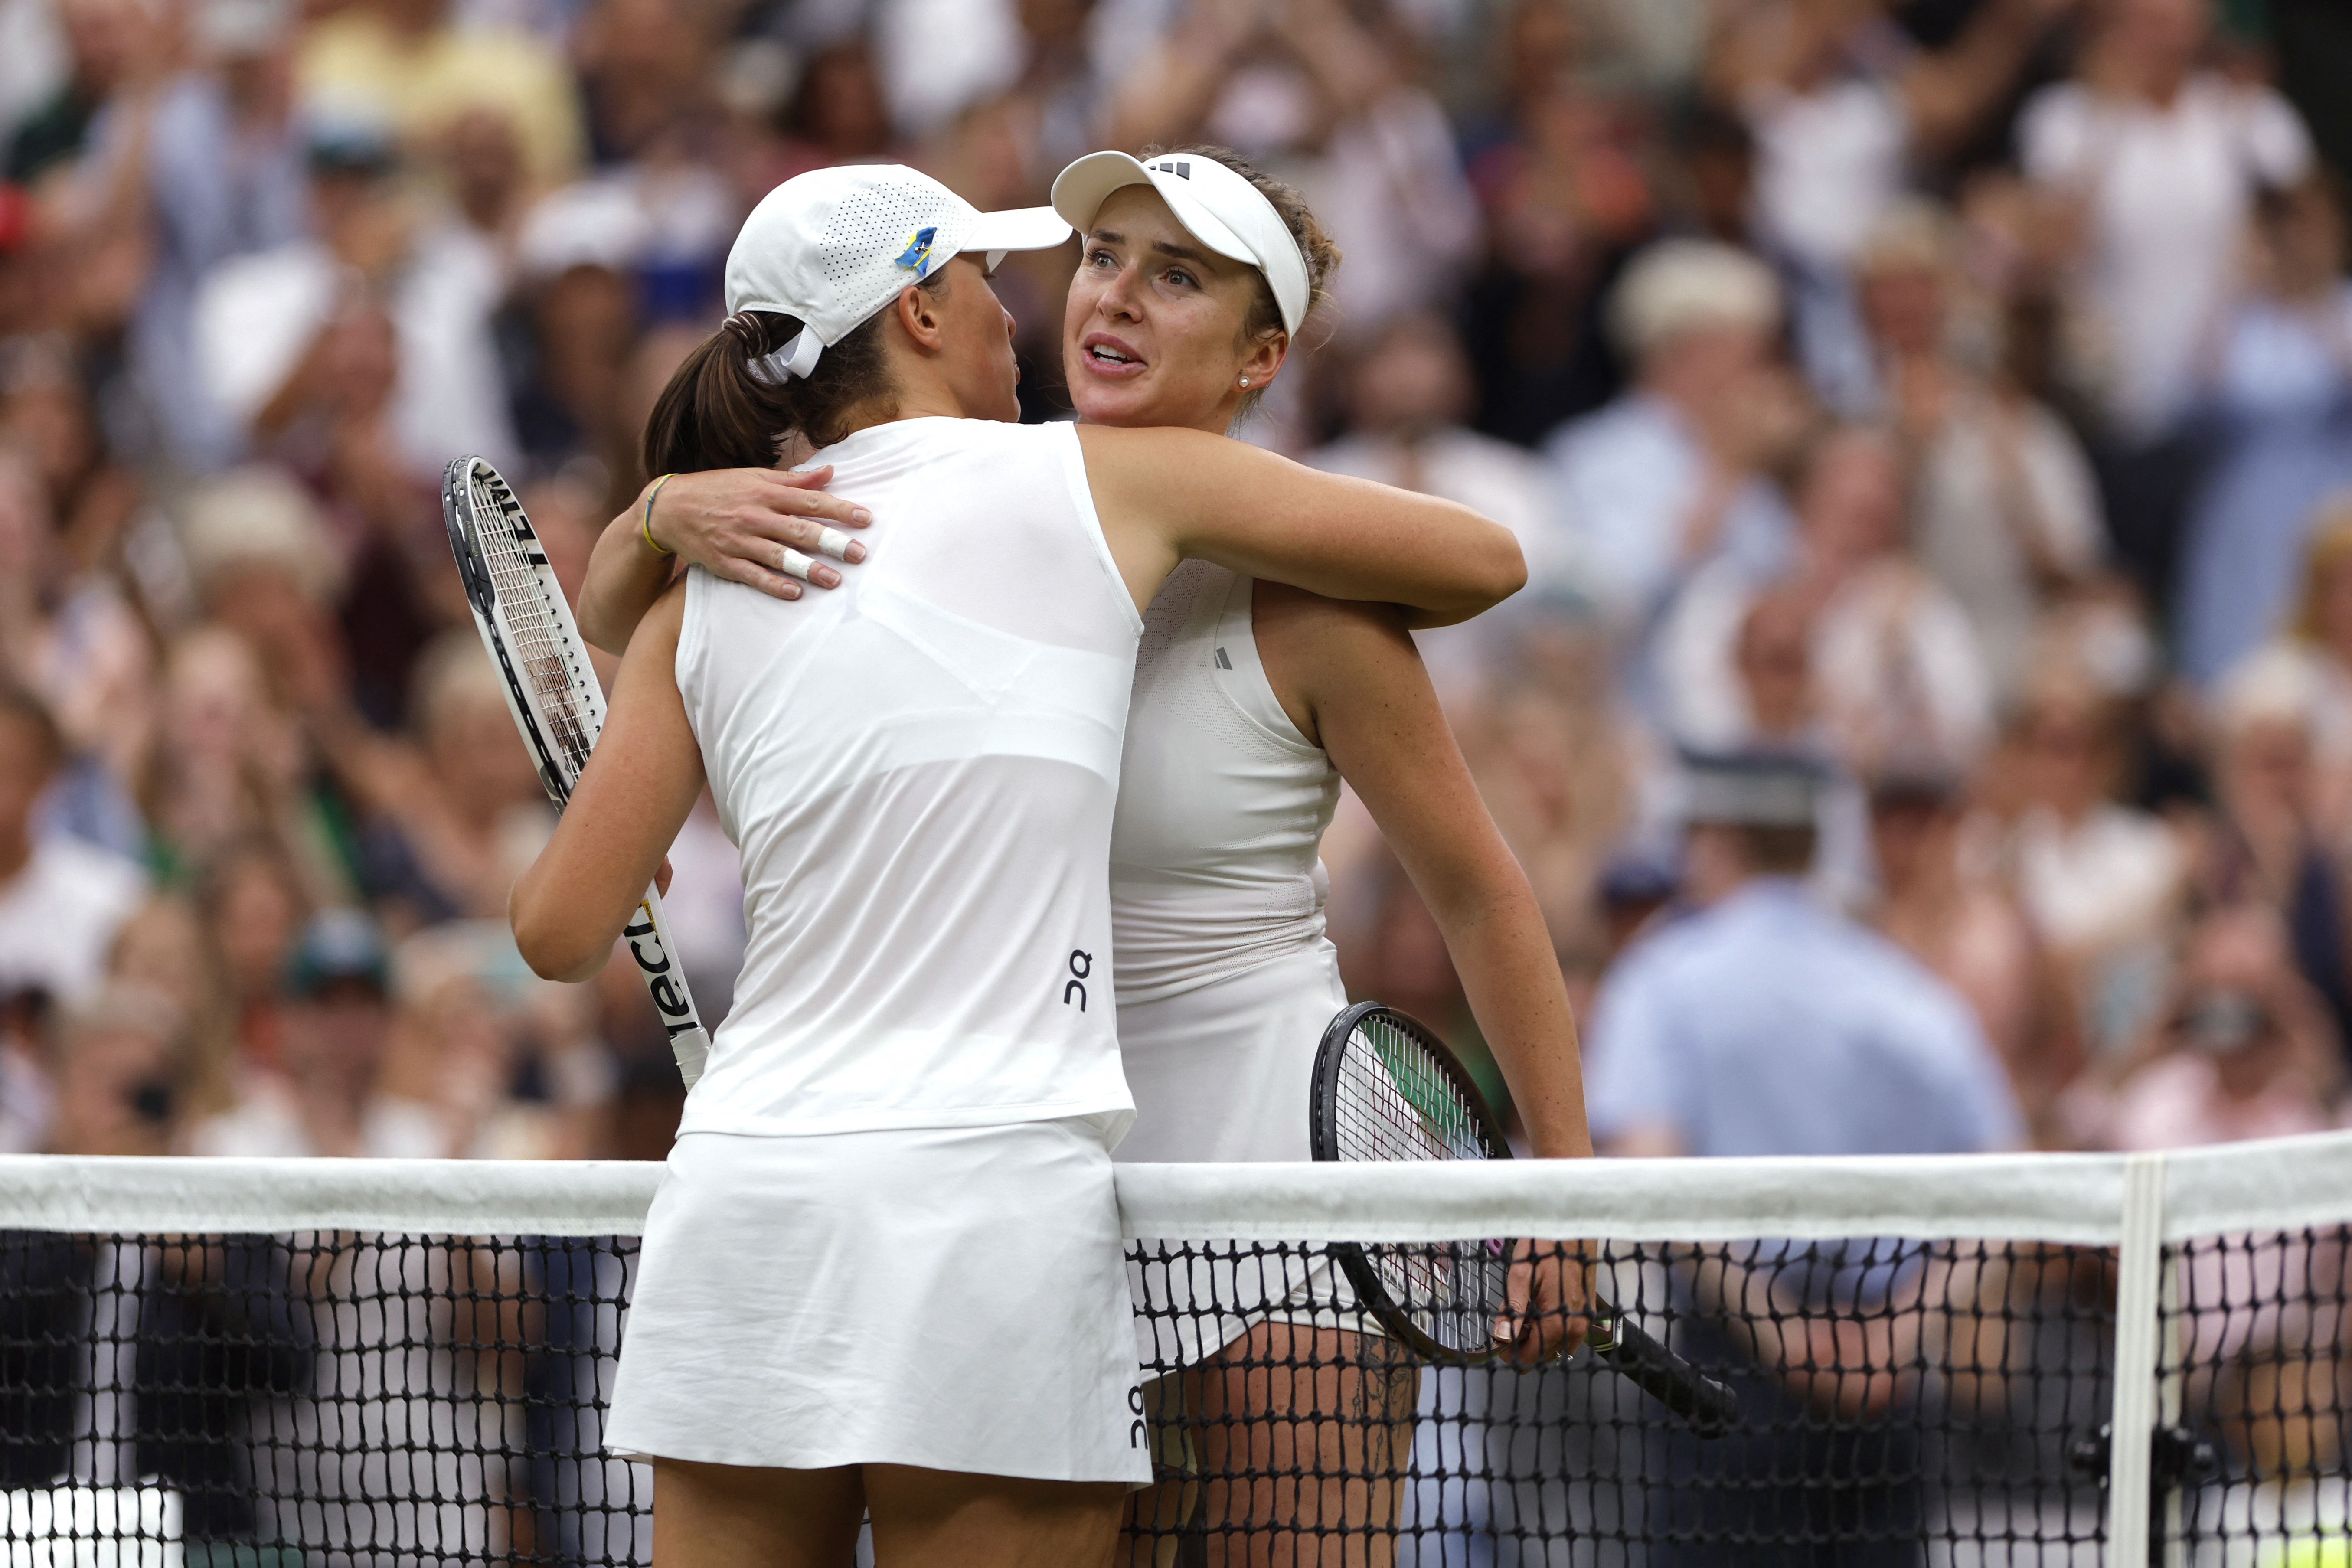 Top seed Swiatek toppled by Svitolina in Wimbledon quarter-finals Reuters